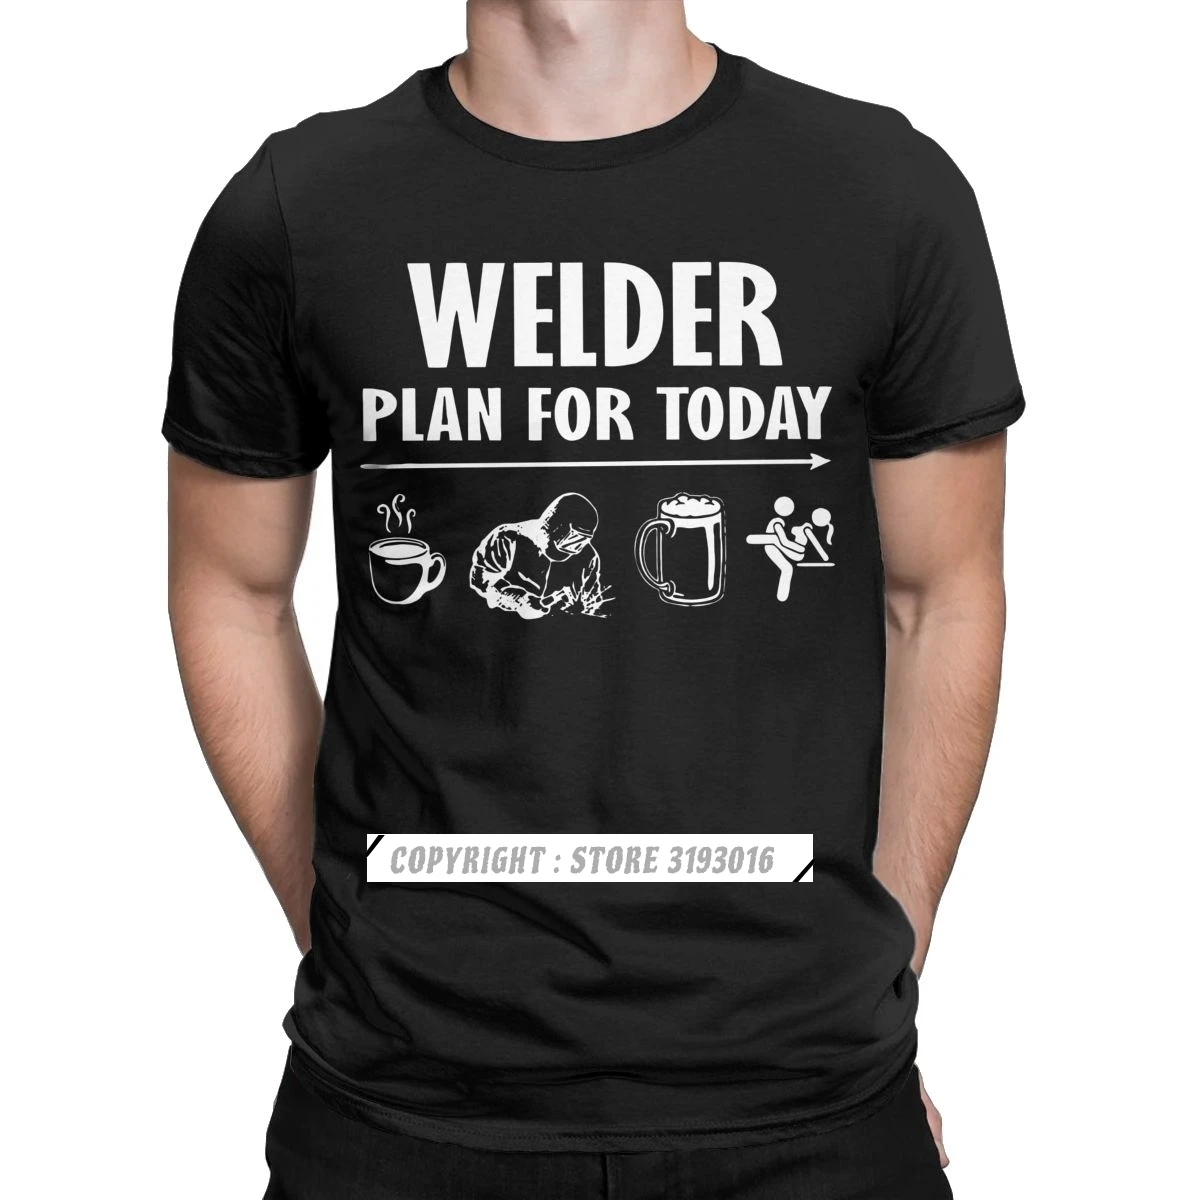 Casual Plan For Today Coffee Welder Beer Sex T Shirts Men Round Neck Tee Shirt Funny Welding Christmas for Welder Tees Adult